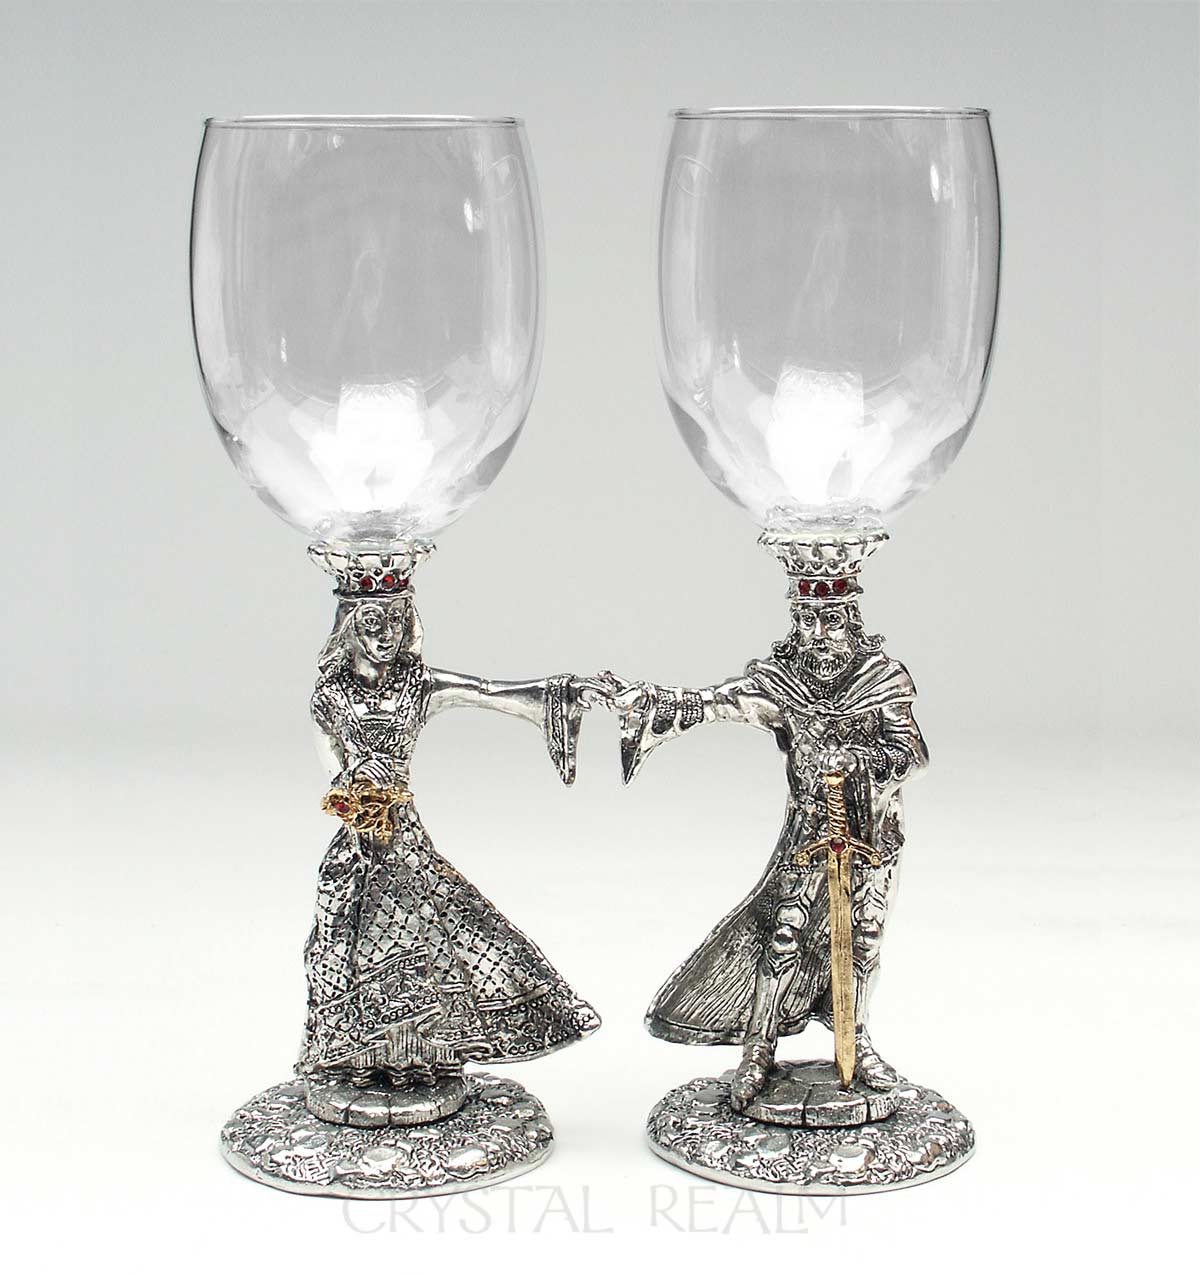 Arthur and Guinevere toasting glasses